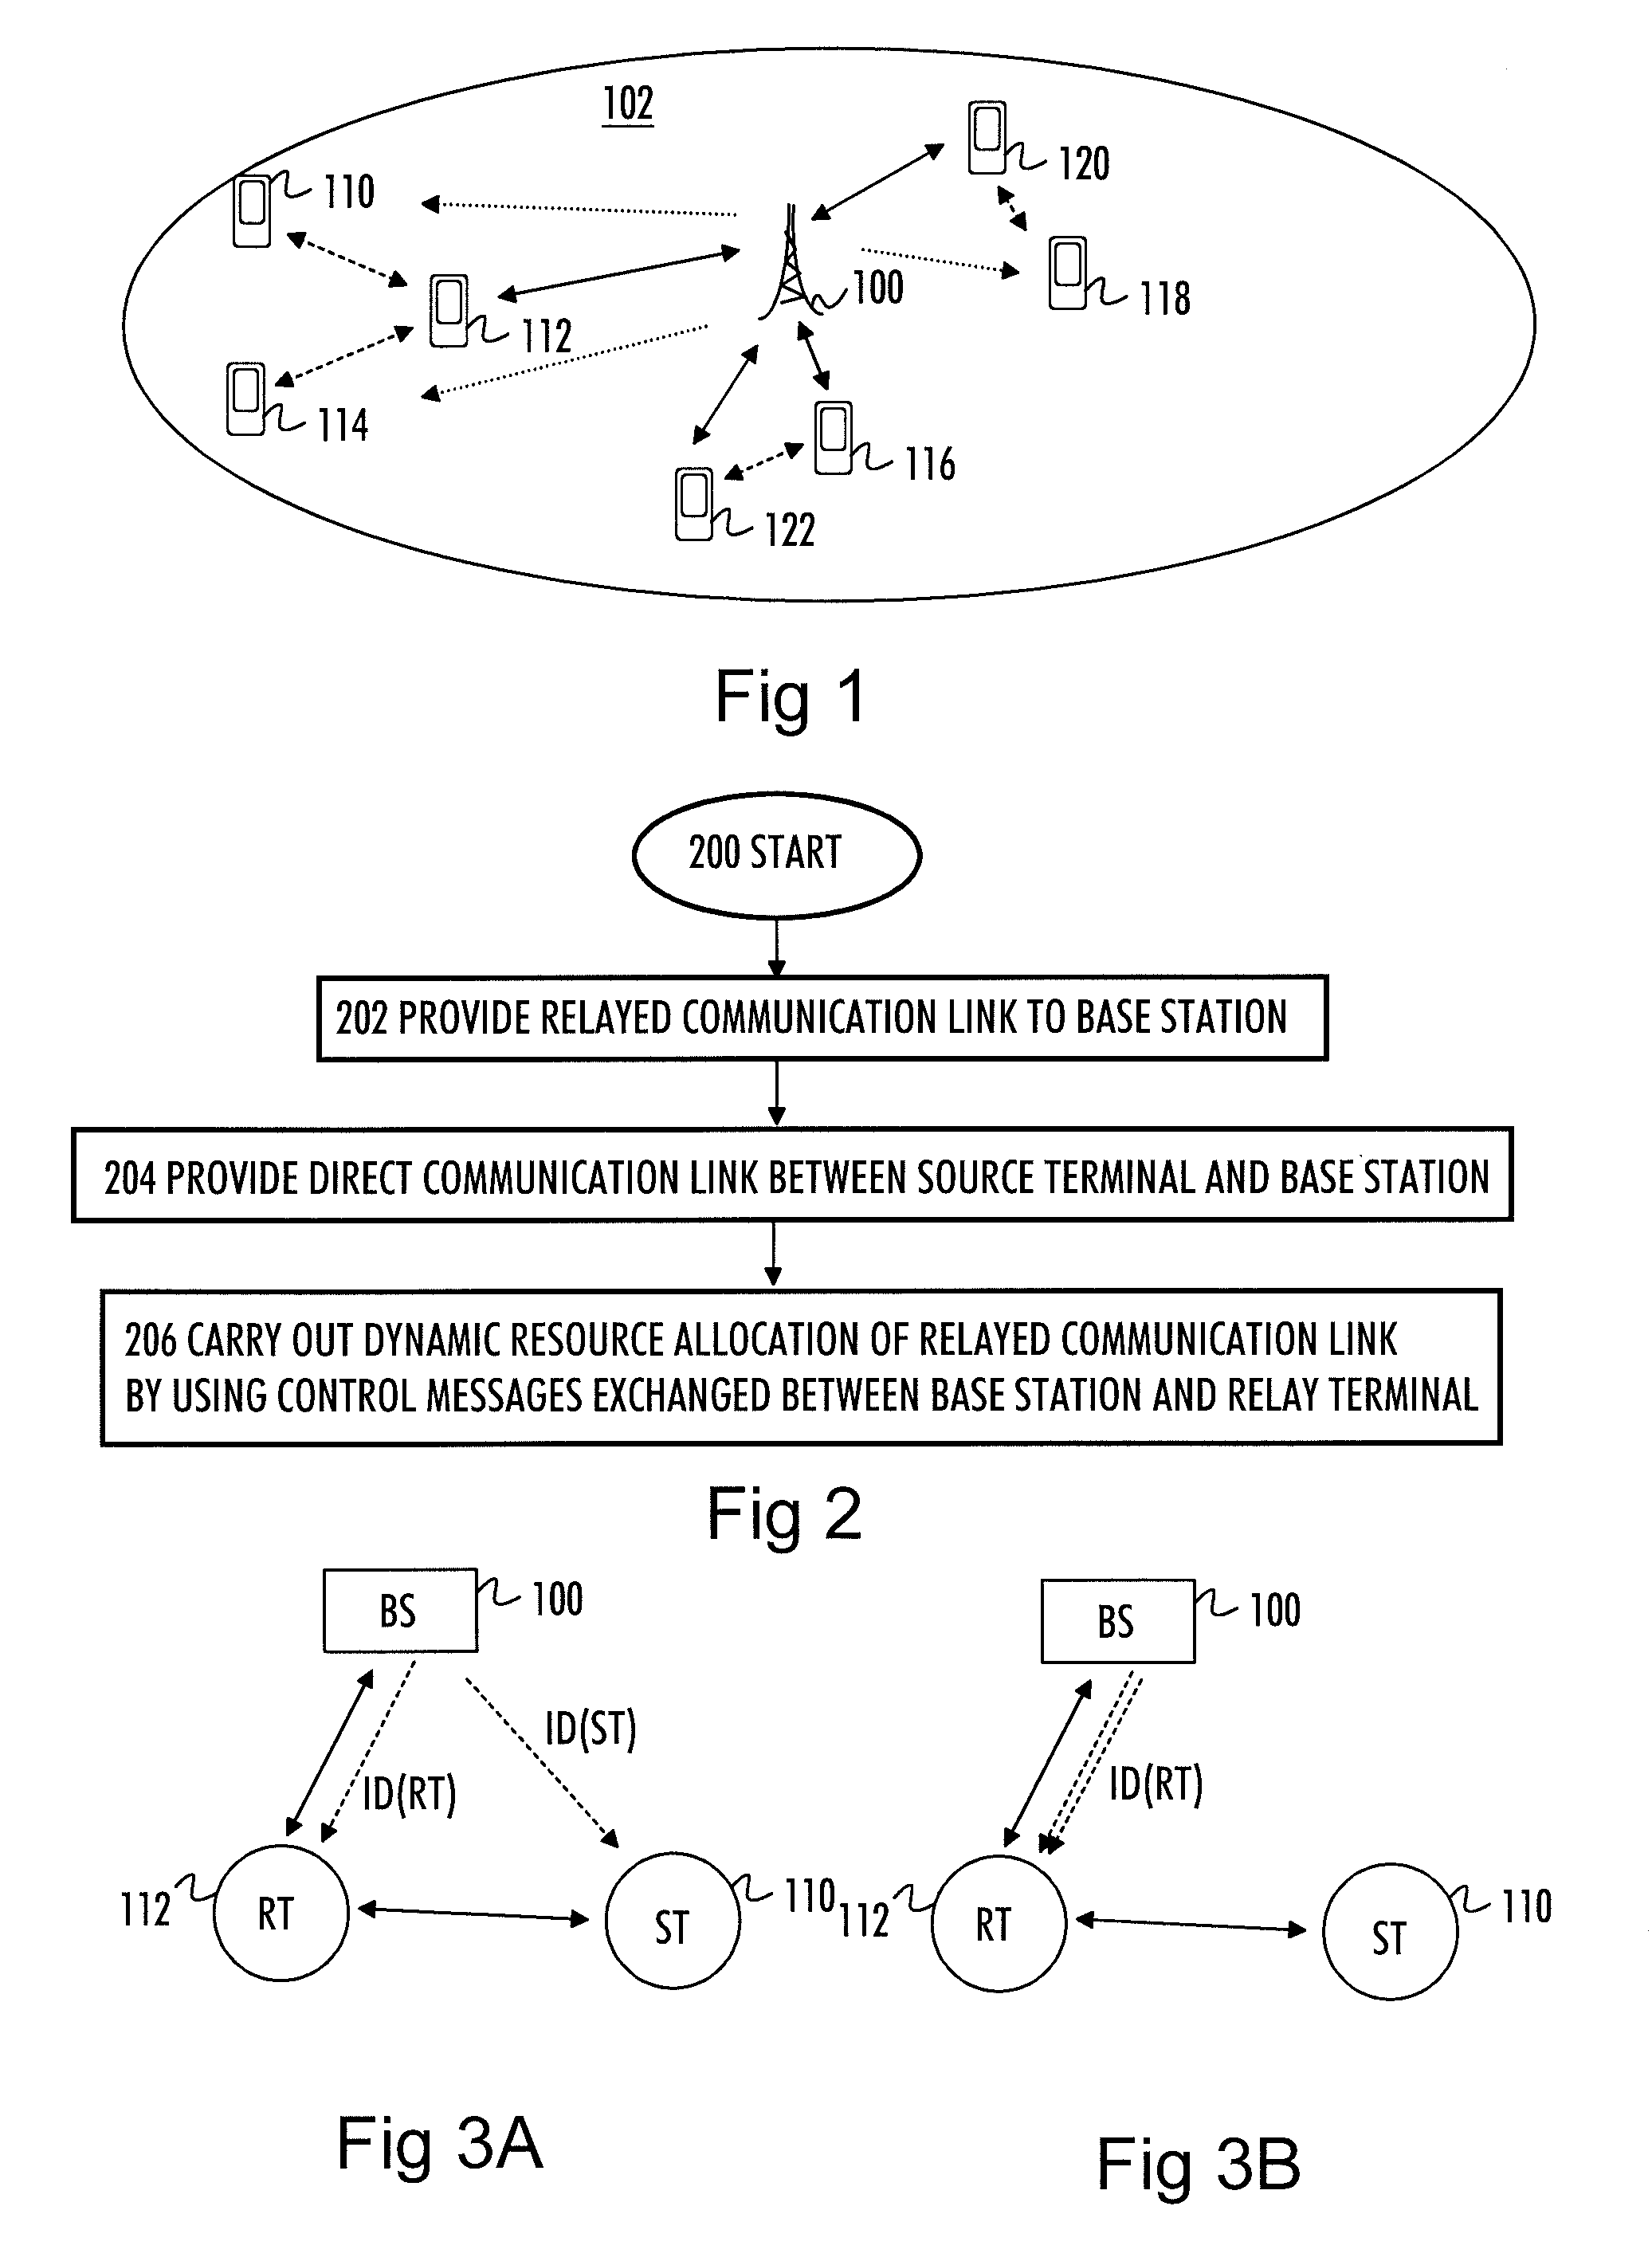 Control Signaling in System Supporting Relayed Connections